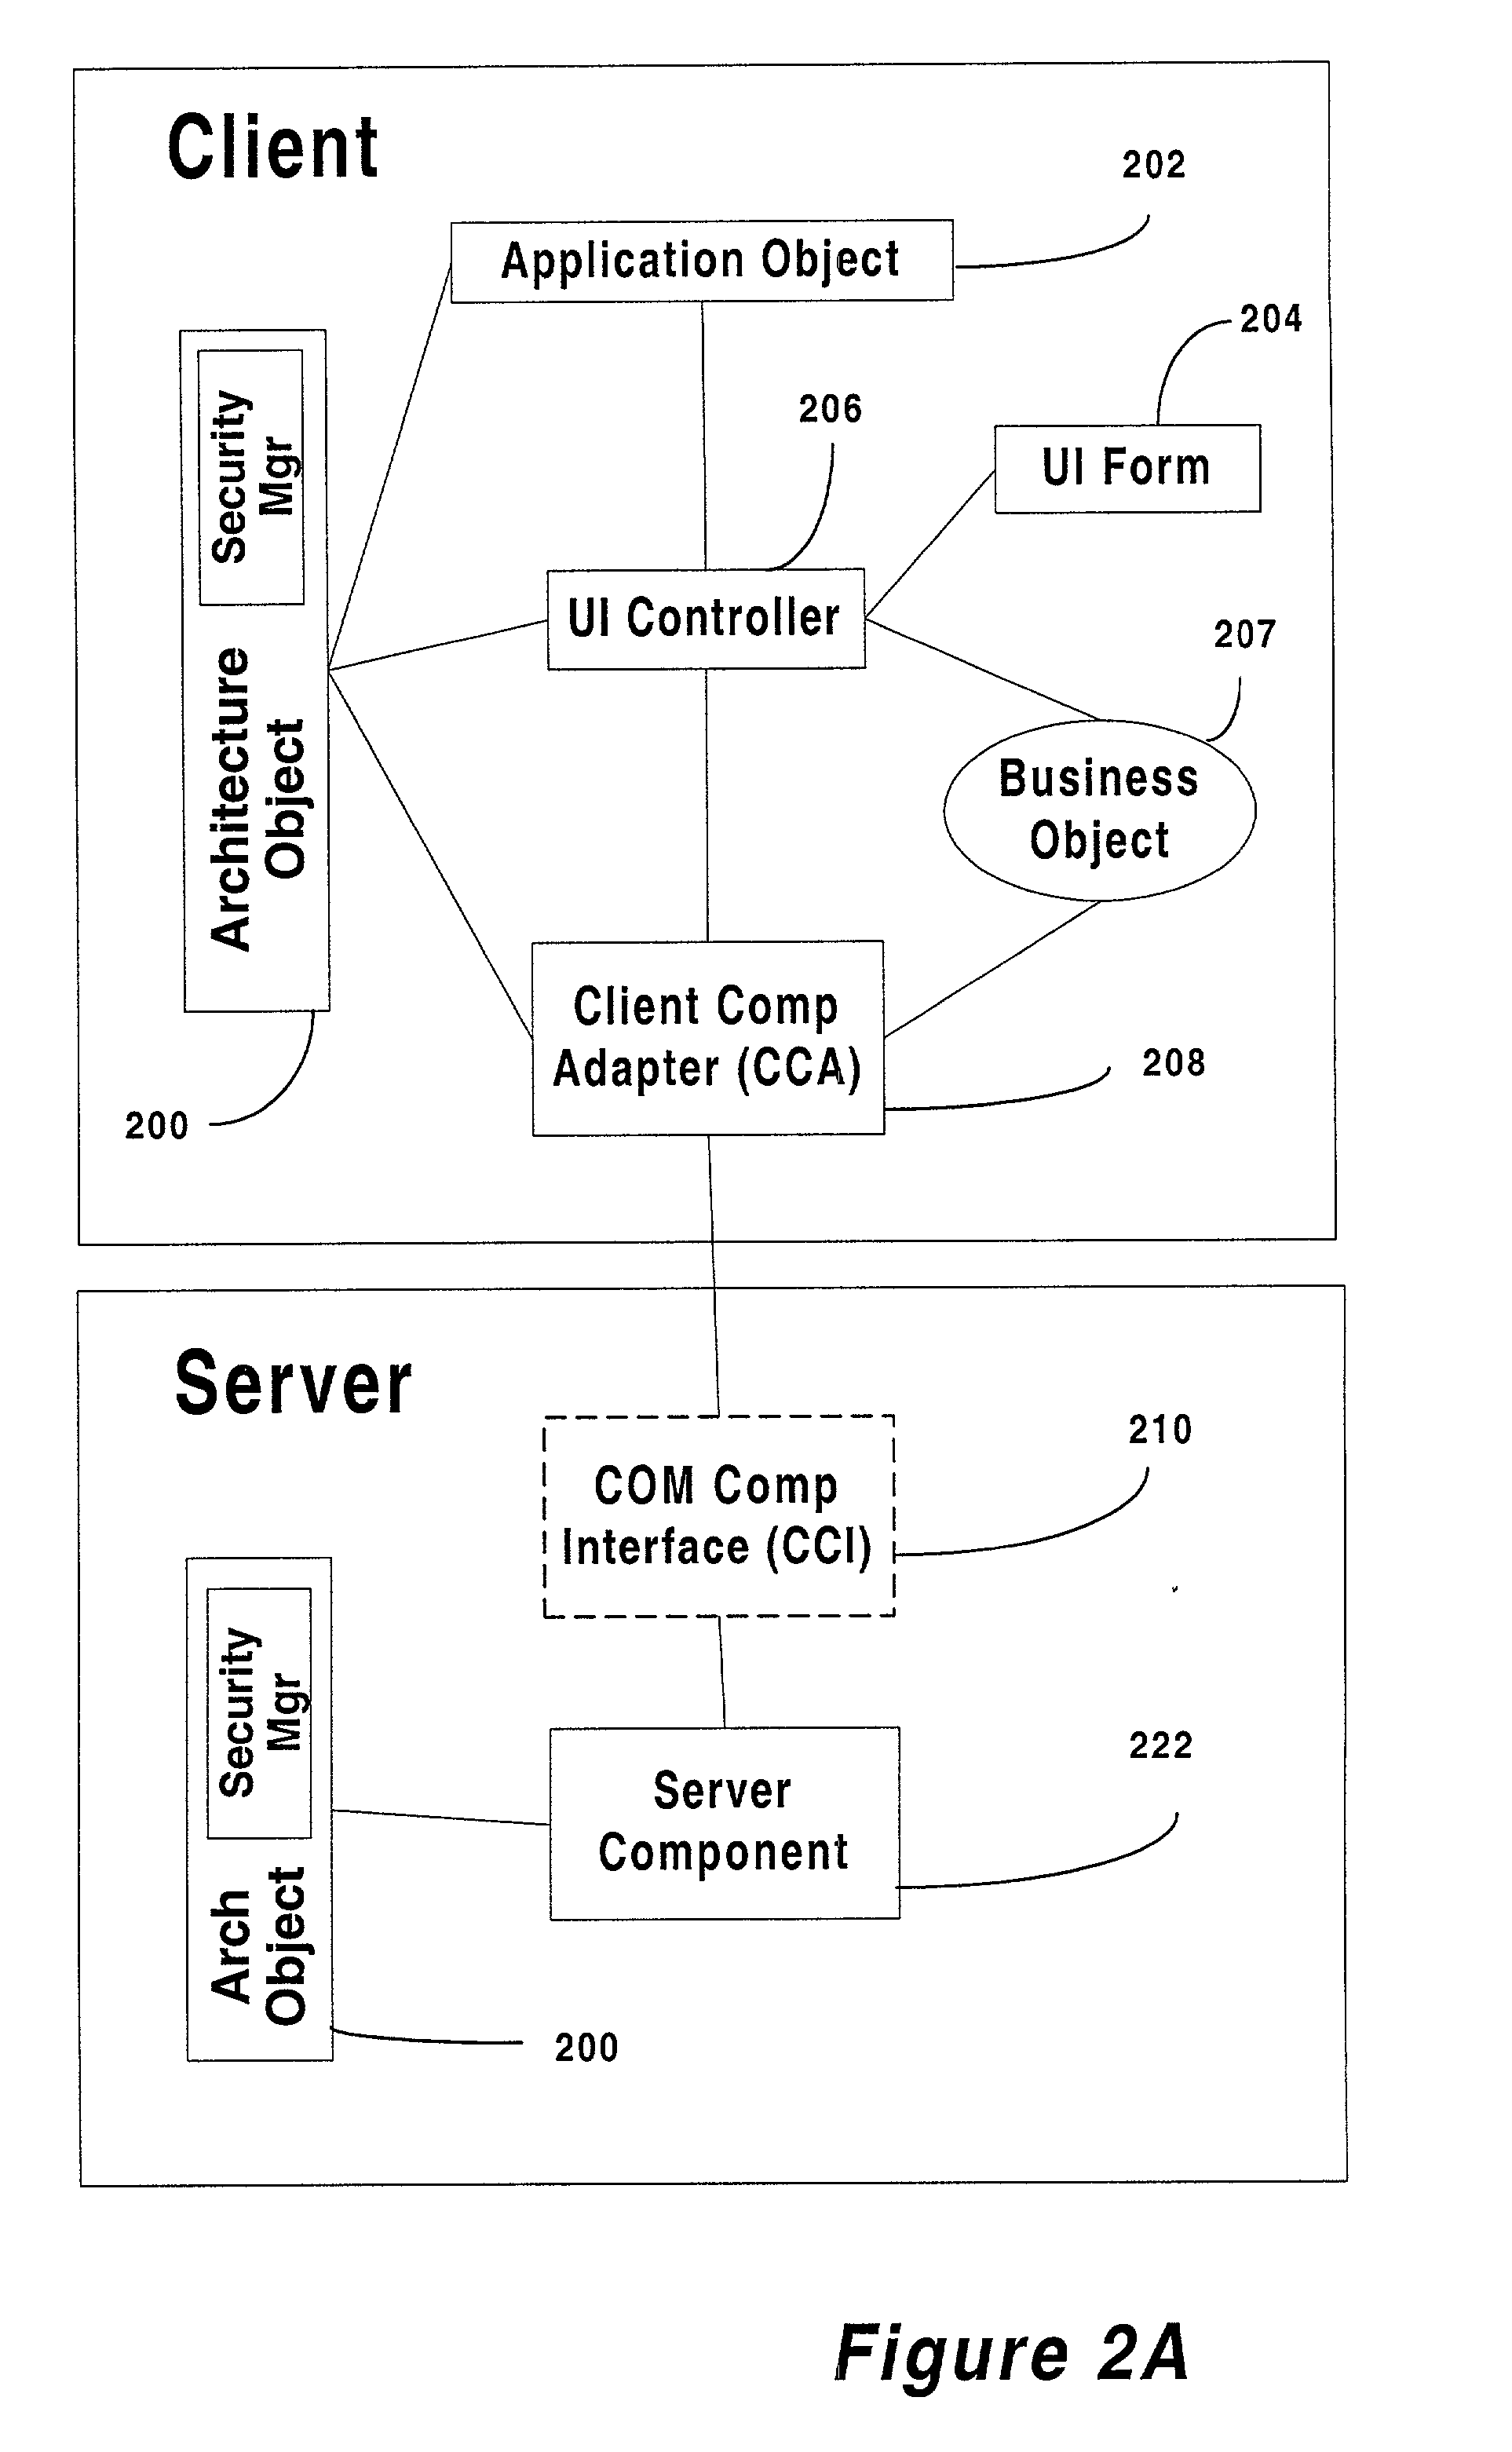 Method and article of manufacture for providing a component based interface to handle tasks during claim processing